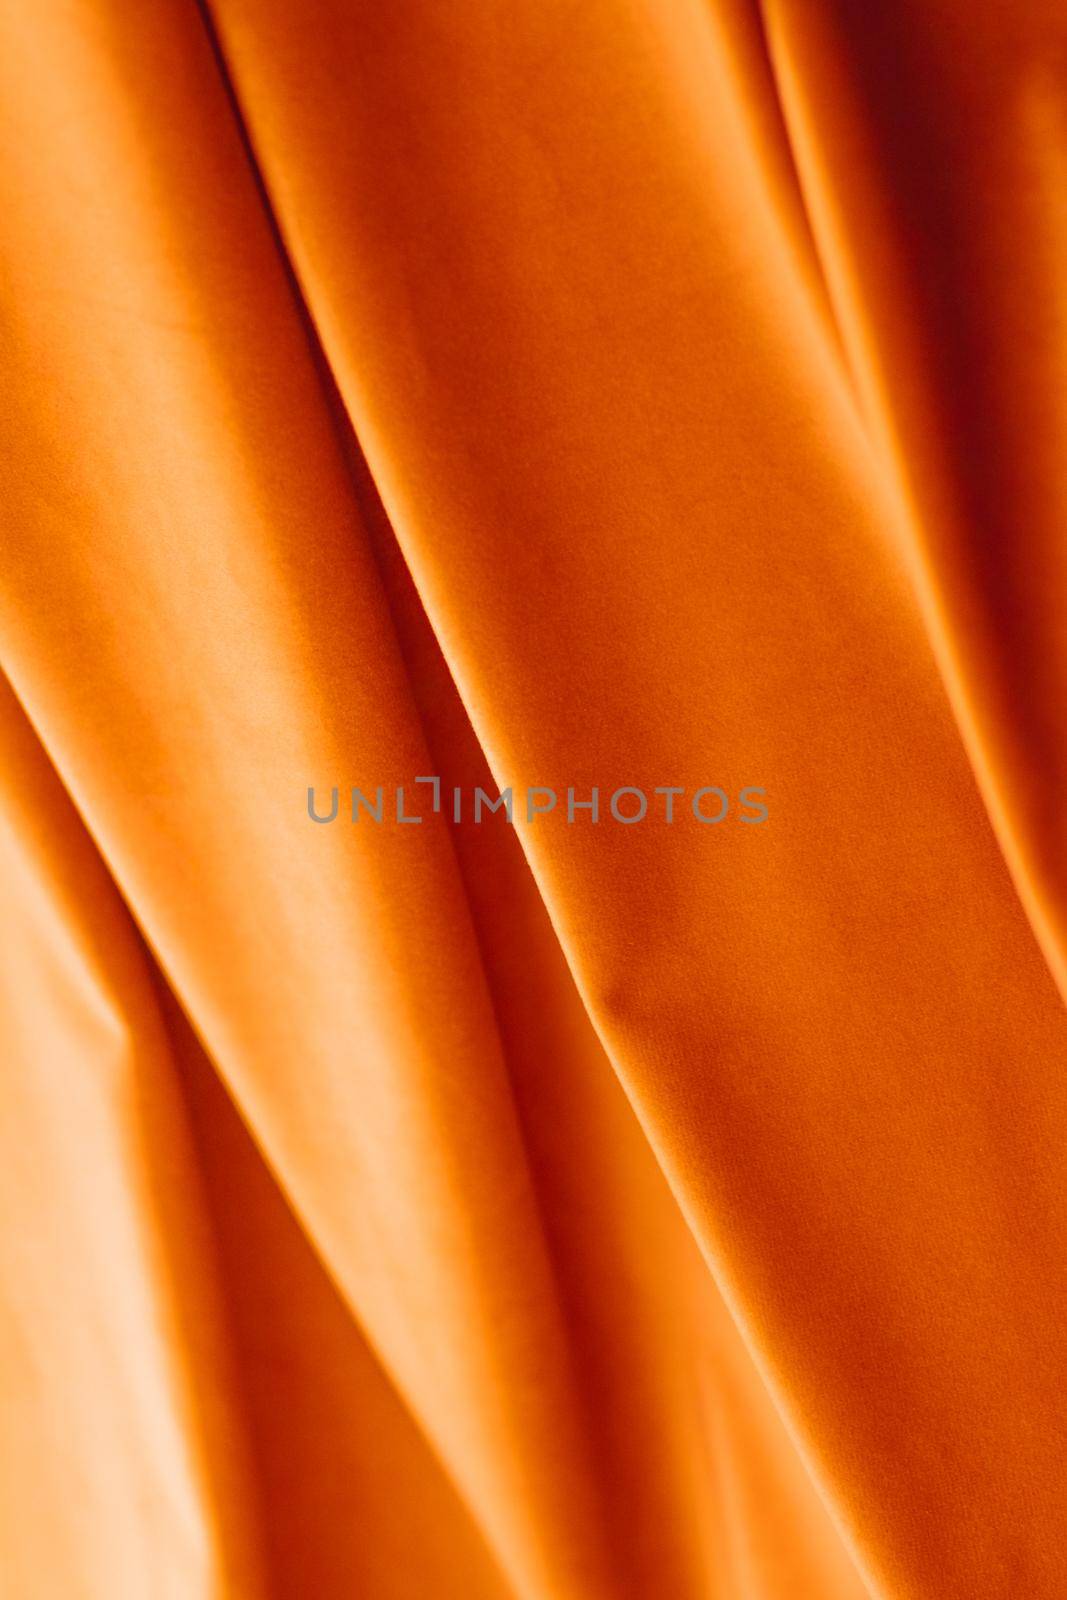 Decoration, branding and surface concept - Abstract orange fabric background, velvet textile material for blinds or curtains, fashion texture and home decor backdrop for luxury interior design brand